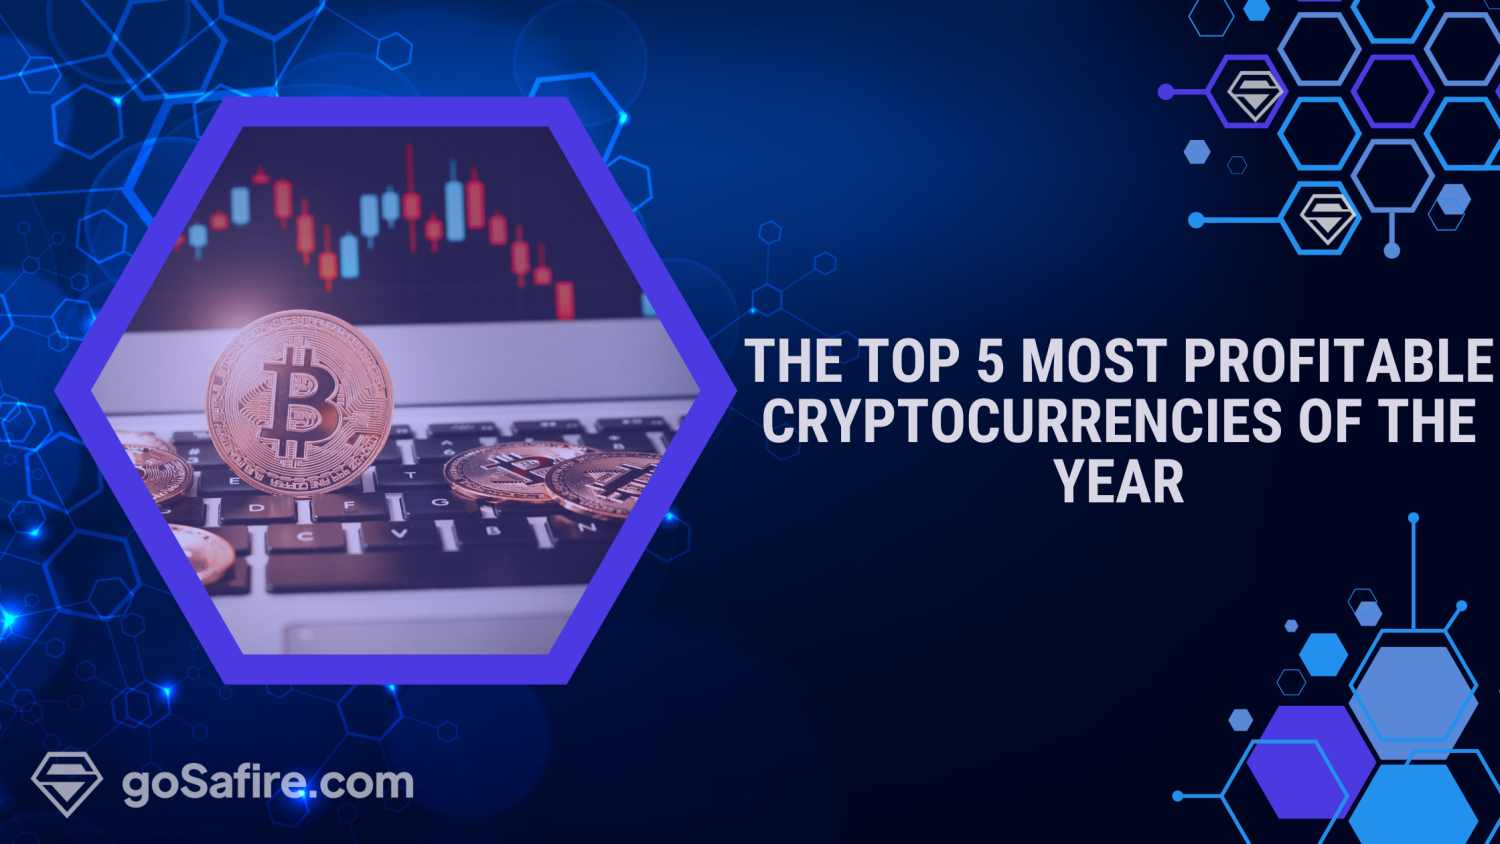 Top 5 Most Profitable Cryptocurrencies of the Year